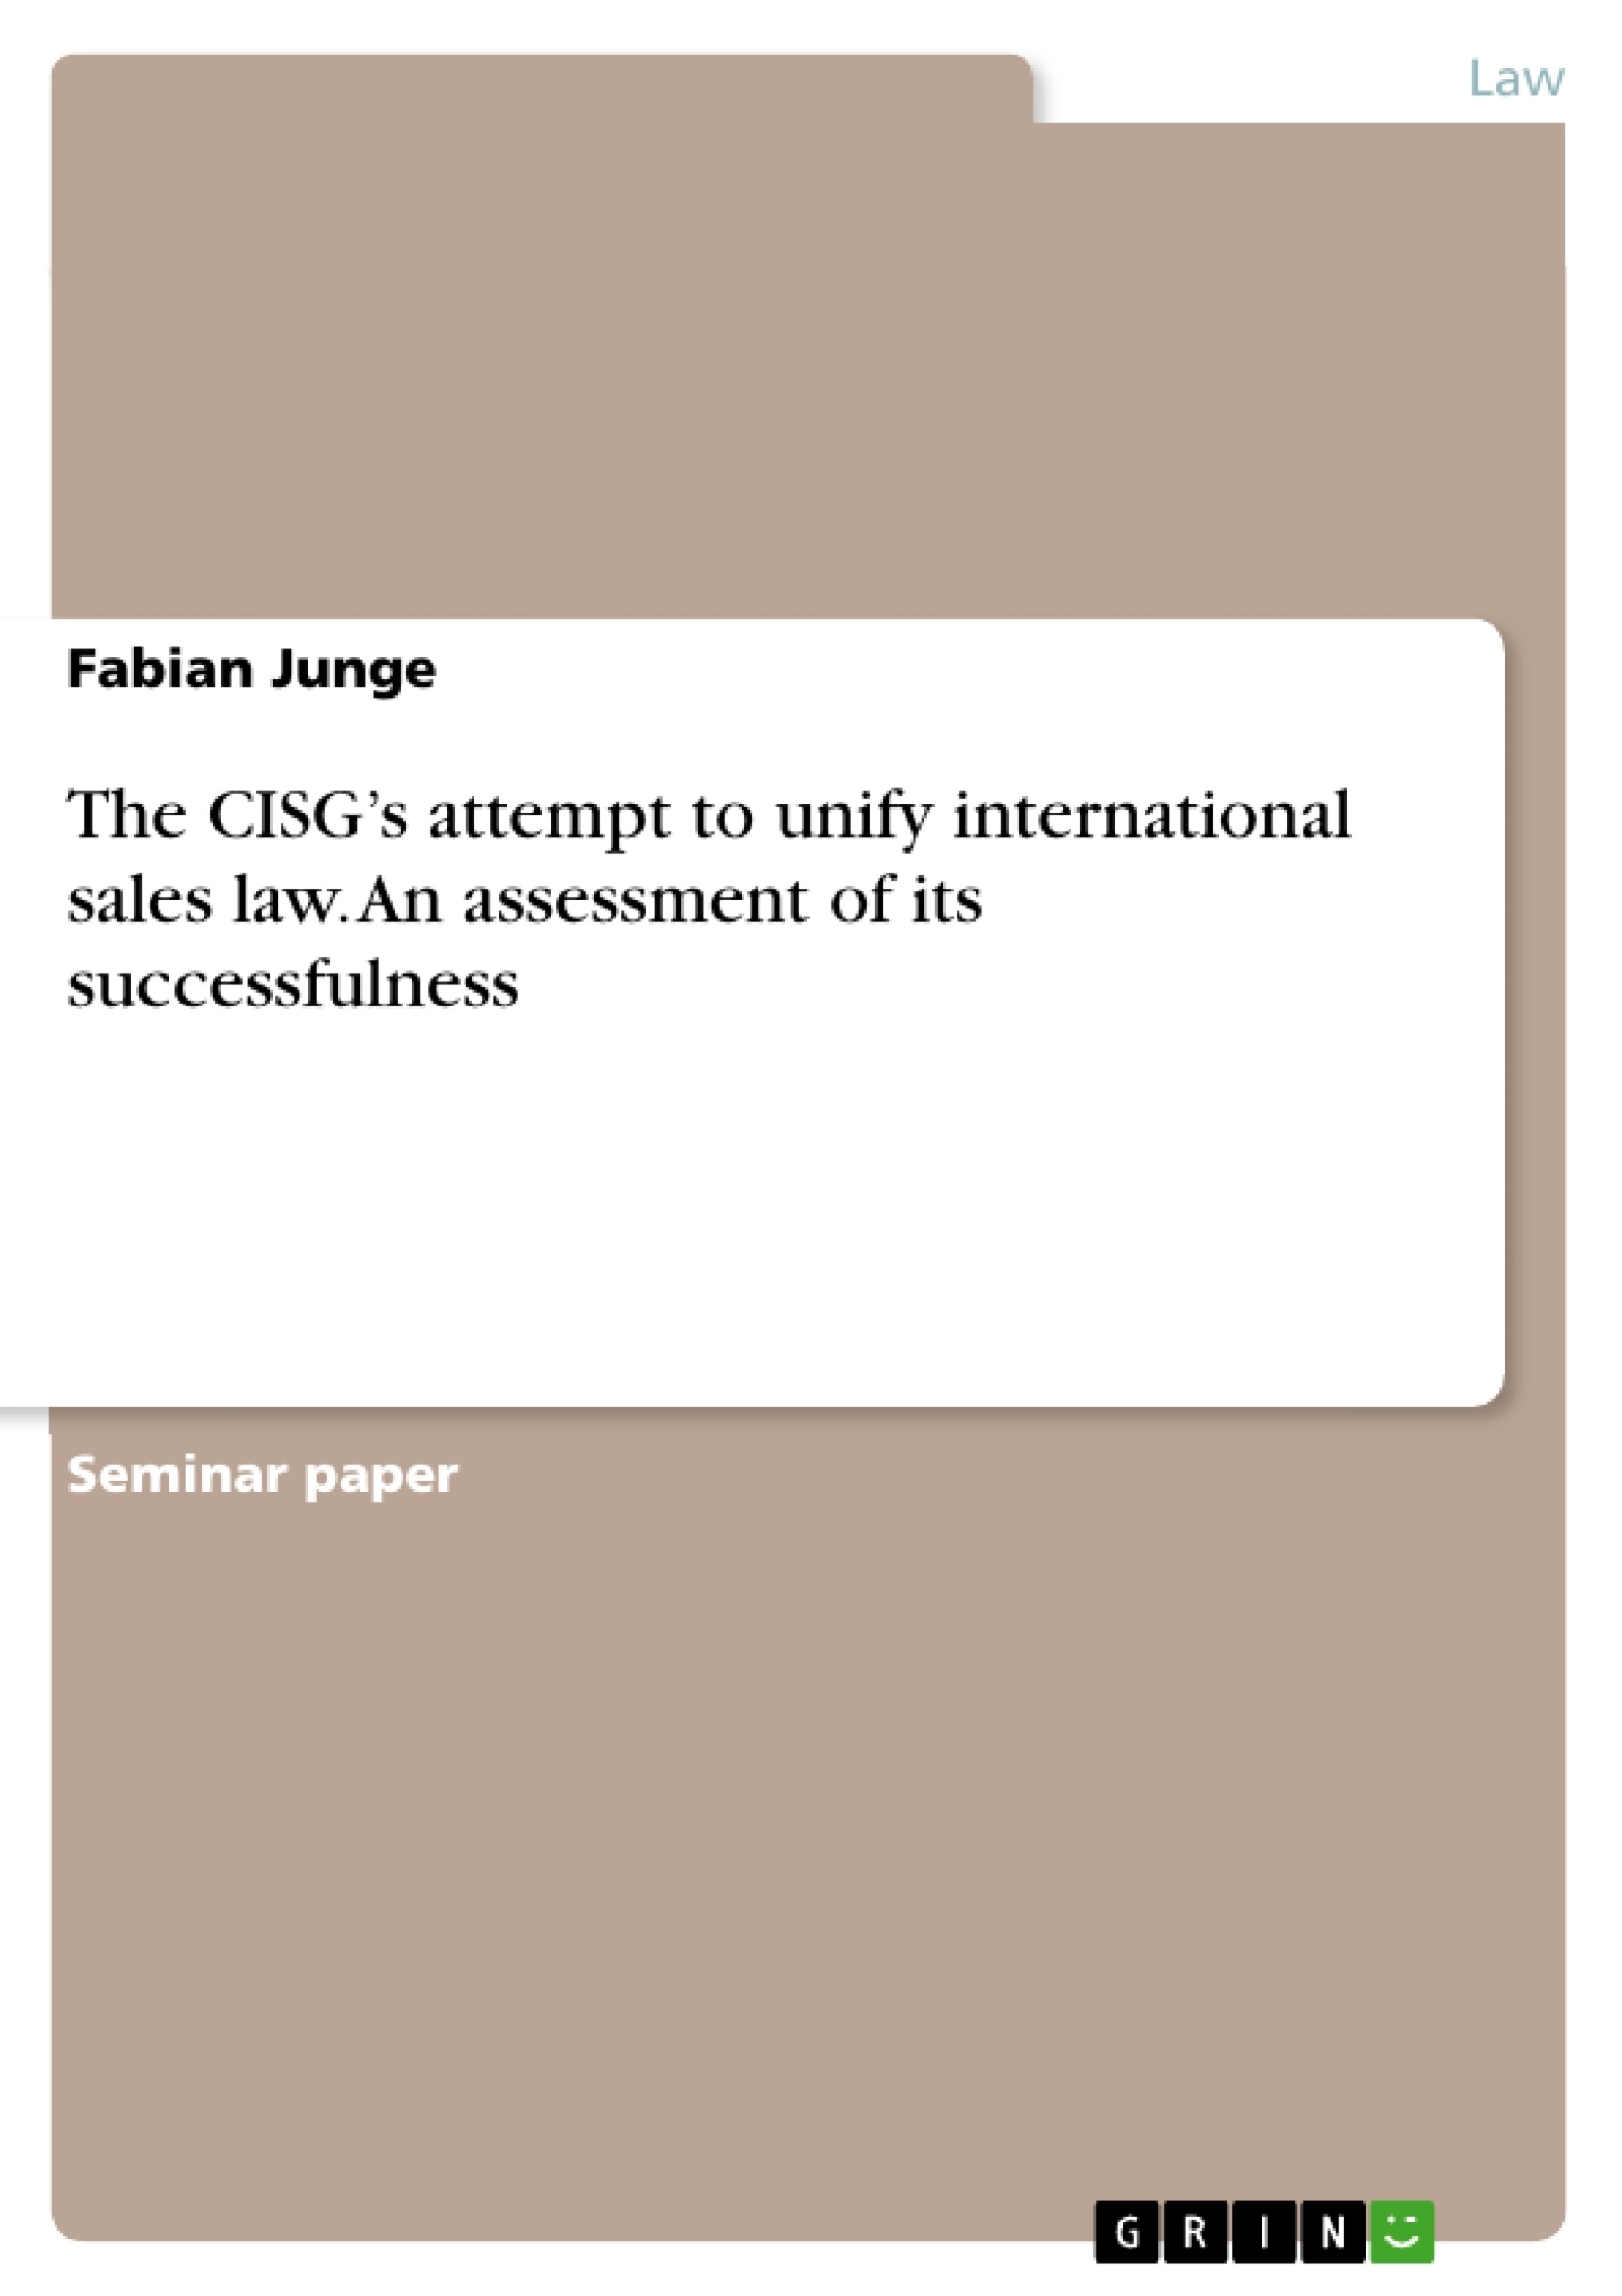 Title: The CISG’s attempt to unify international sales law. An assessment of its successfulness